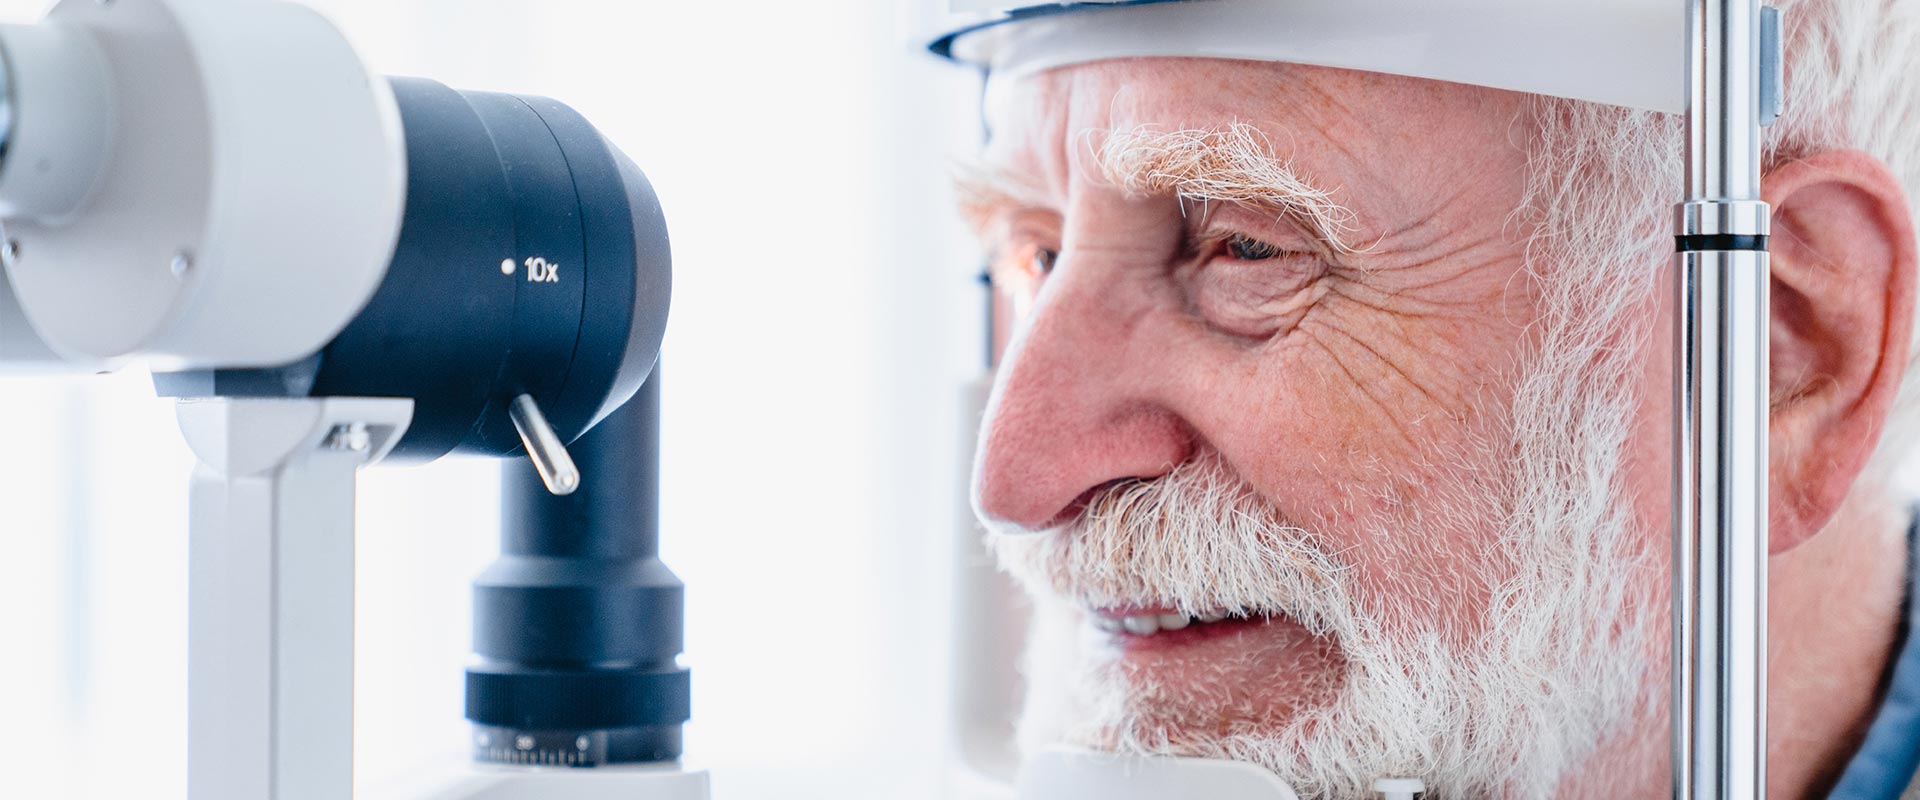 What is a slit lamp test used for?